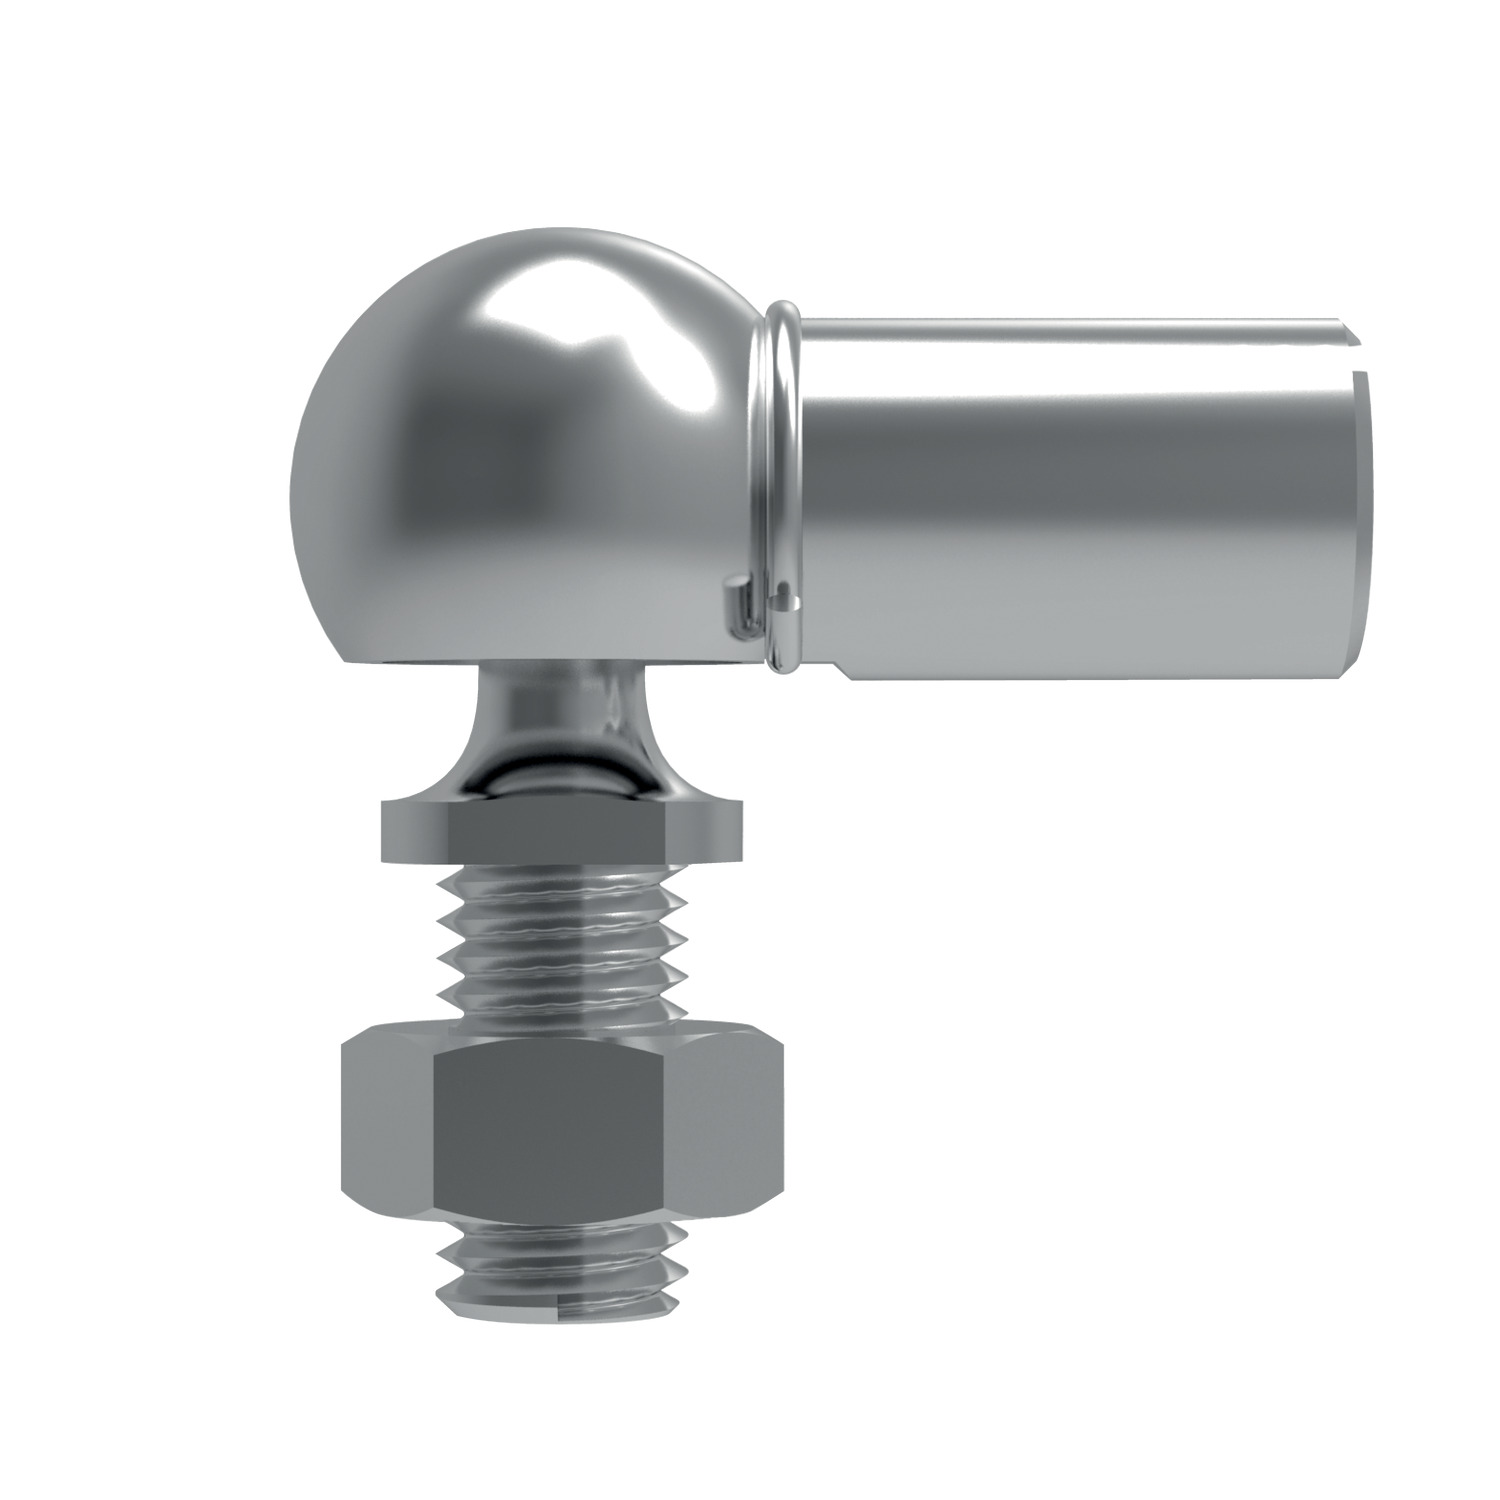 Stainless Ball and Socket Joints Stainless steel ball and socket joints. Manufactured to DIN 71802. Right hand thread.